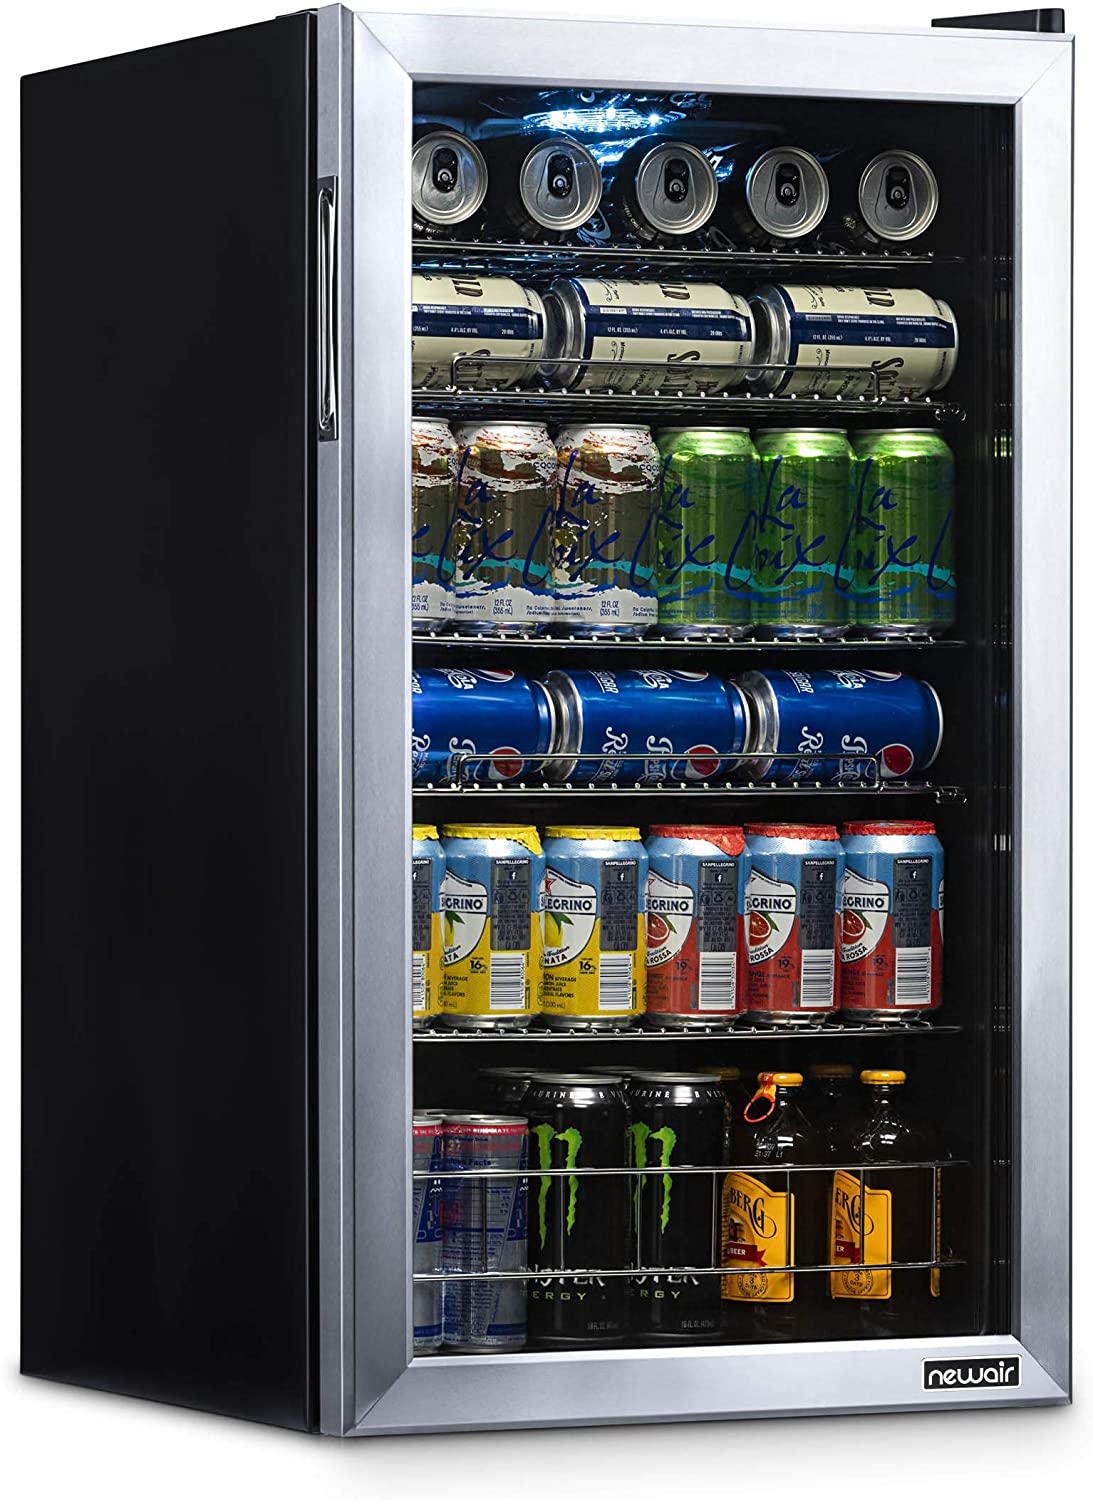 NewAir Beverage Cooler with several bottled and canned drinks